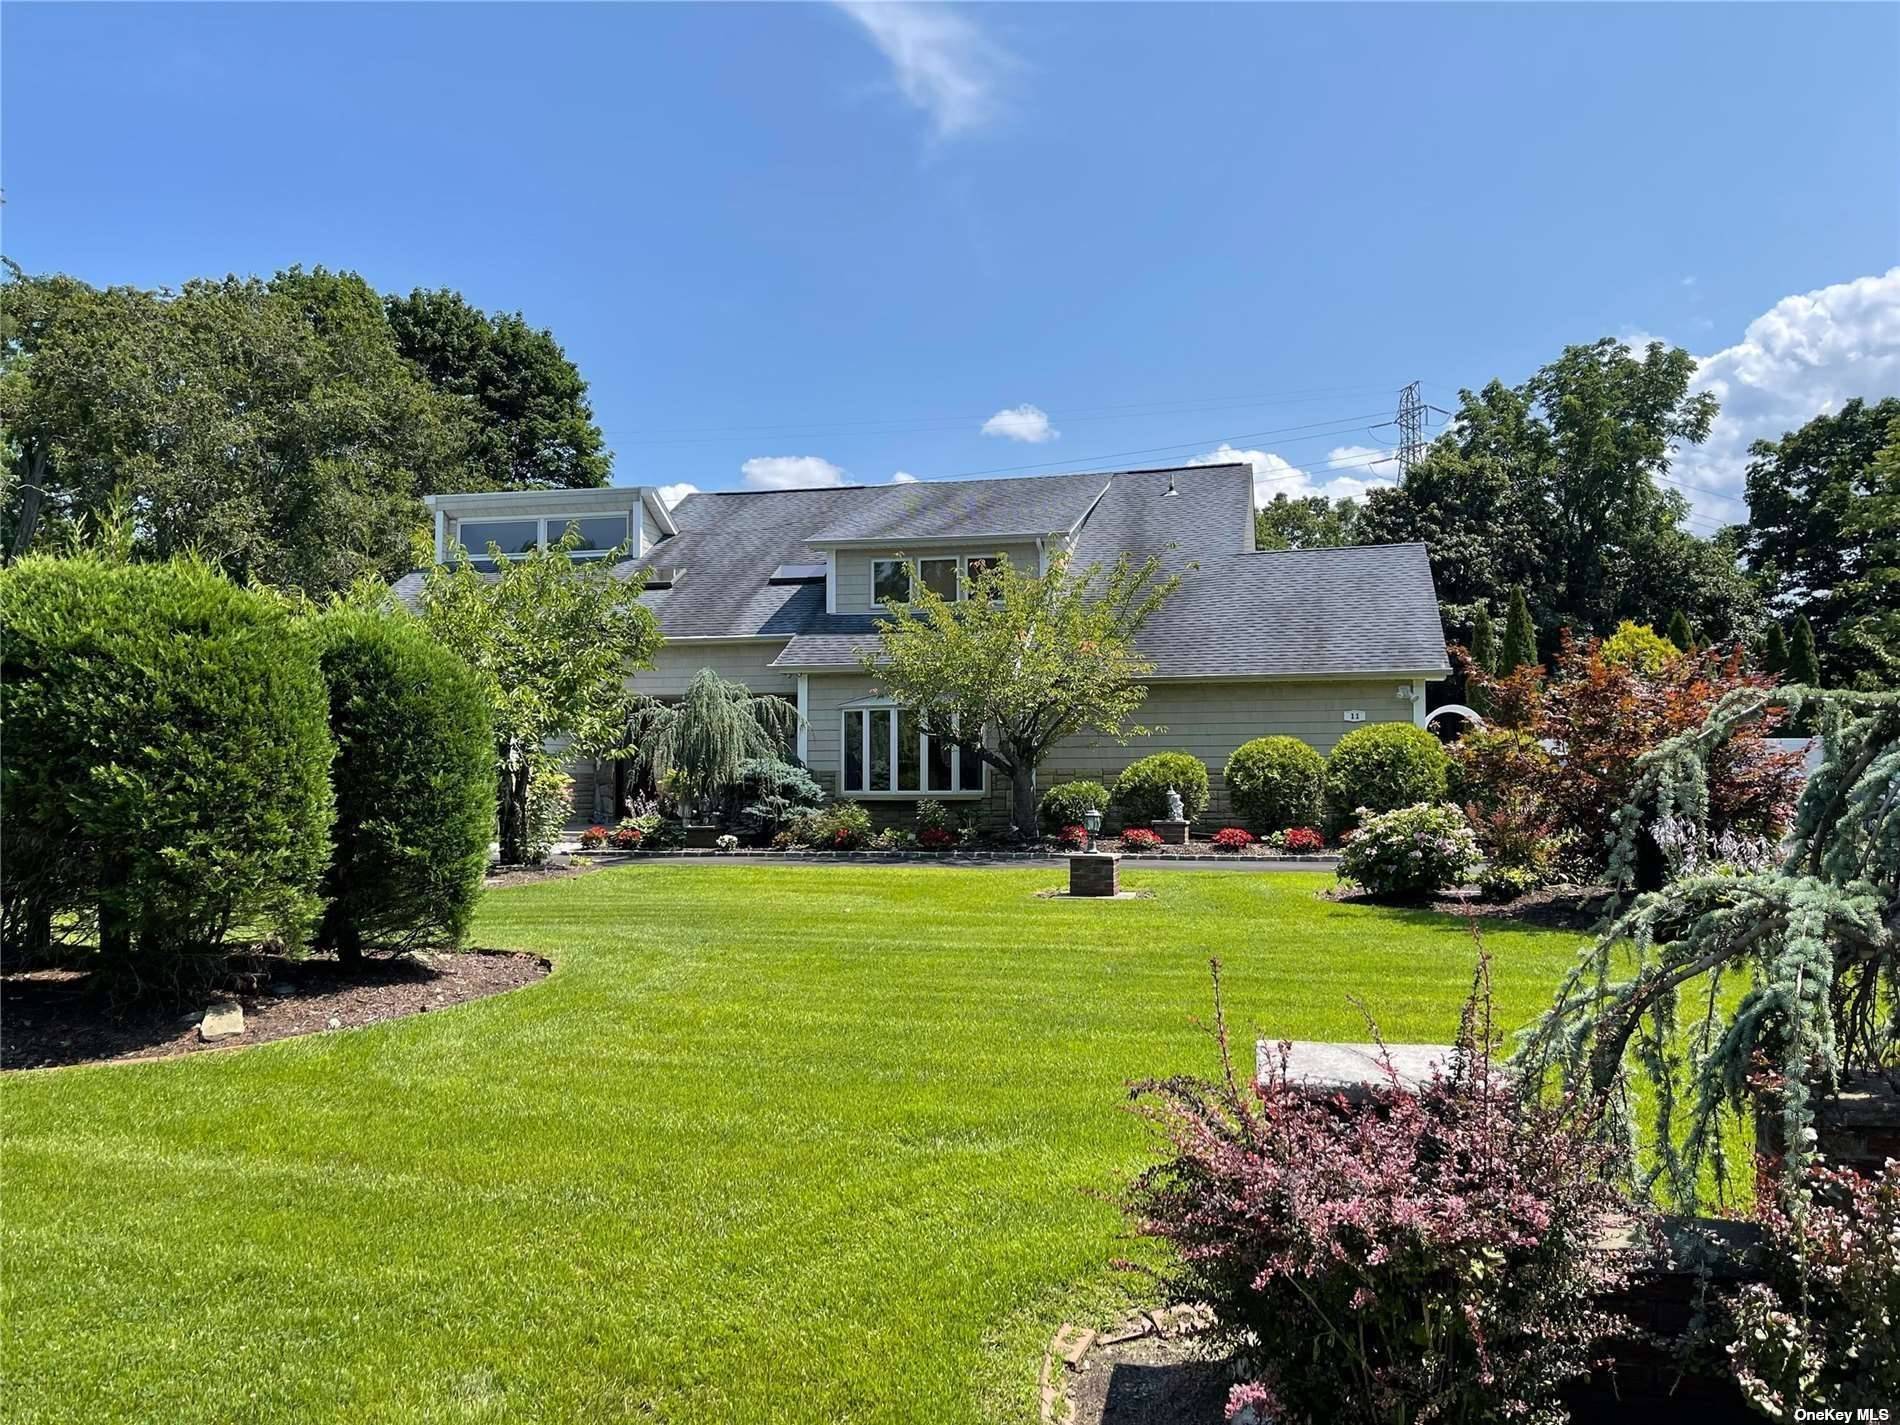 Roslyn Harbor Spectacular 5 Bedroom Contemporary in Excellent moving conditions, Home Sits on 1 ACRE plus in Exquisite, Quiet, Residential Neighborhood with desirable Roslyn schools.